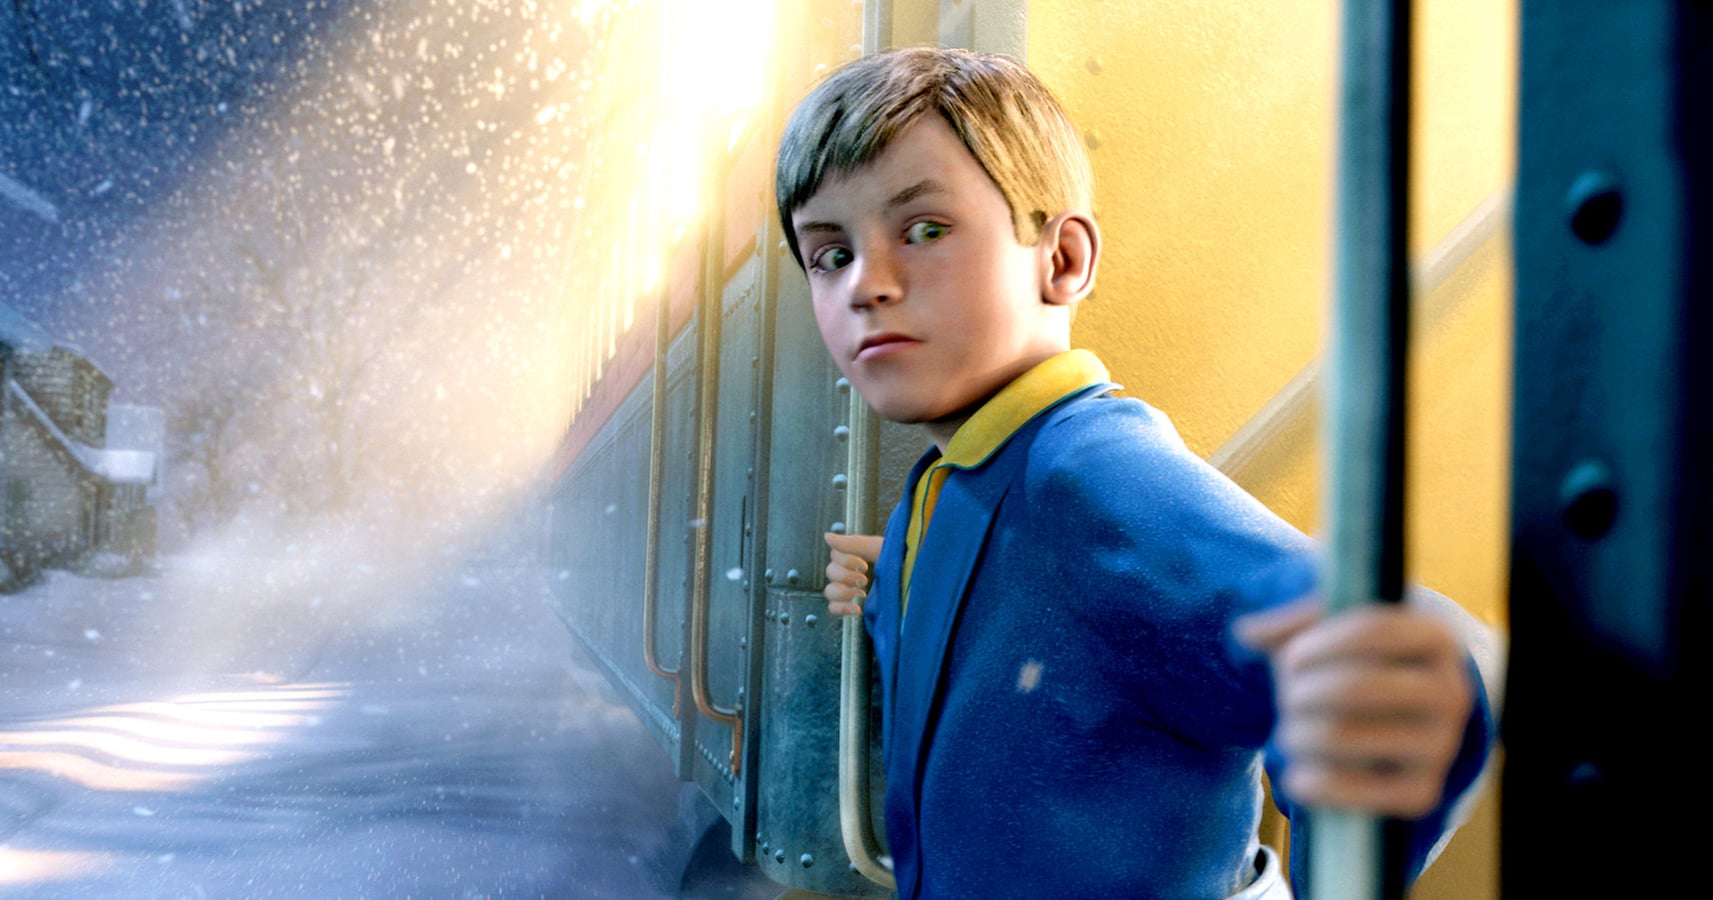 the-15-best-snow-filled-movies,-from-“the-polar-express”-to-the-chronicles-of-narnia